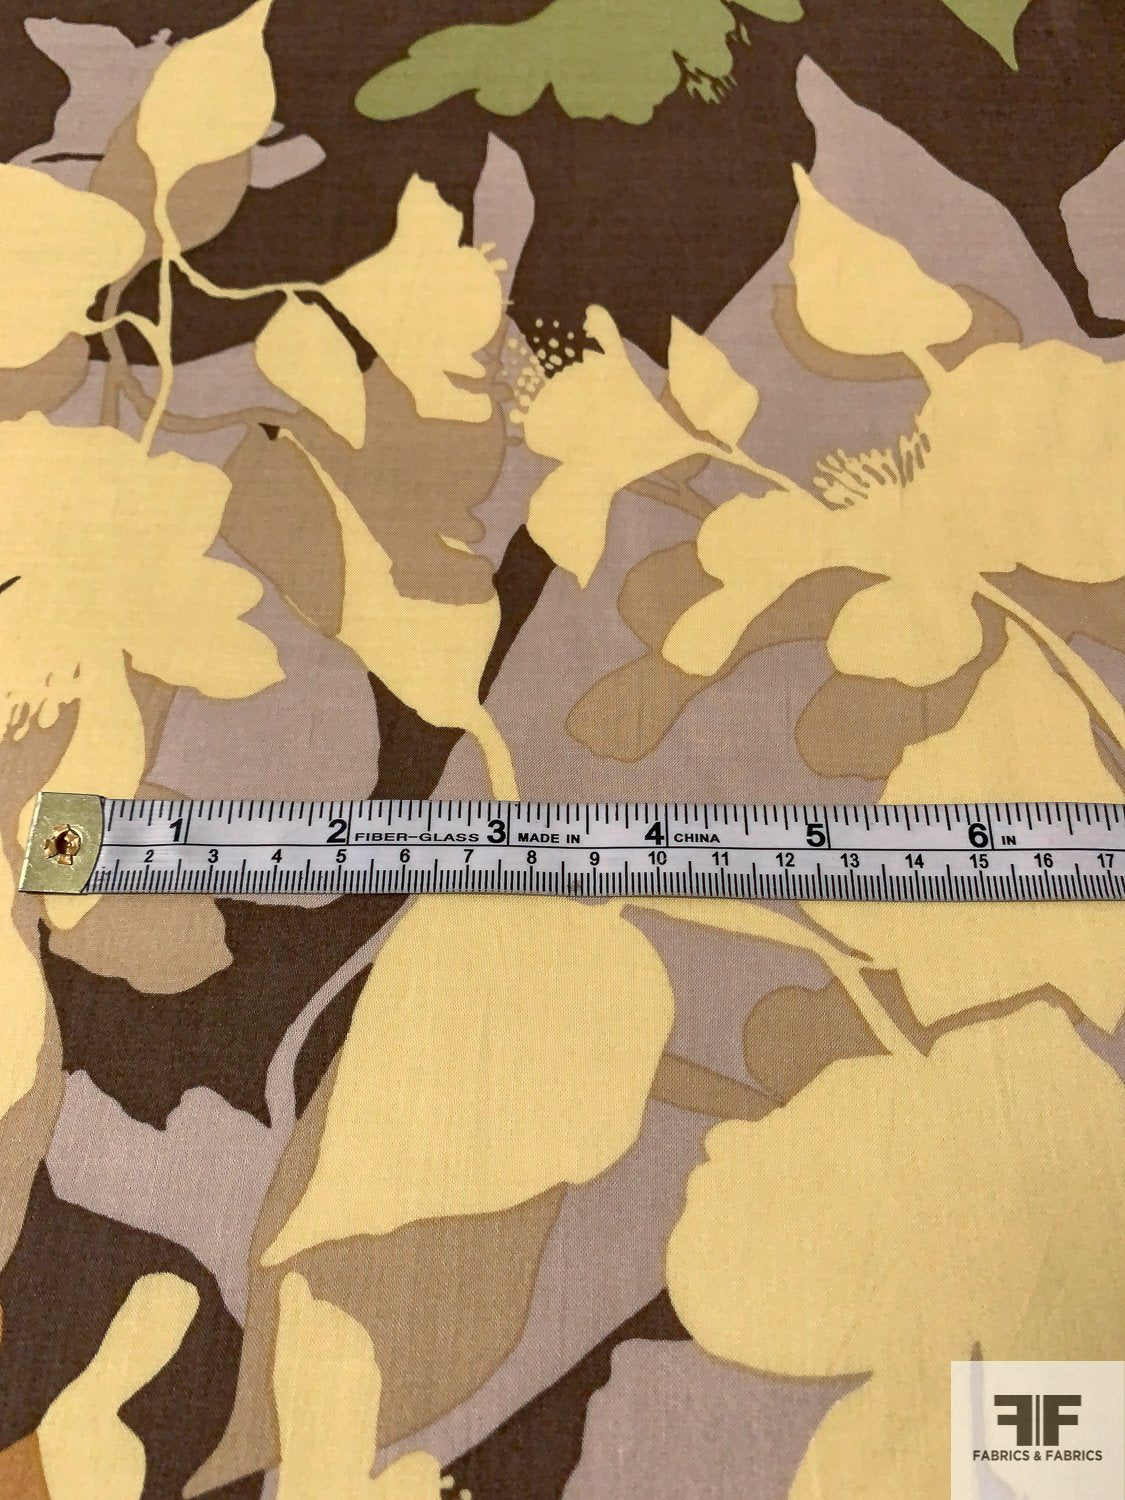 Leaf Harvest Silhouette Printed Cotton Batiste - Muted Butter / Taupe / Green / Brown